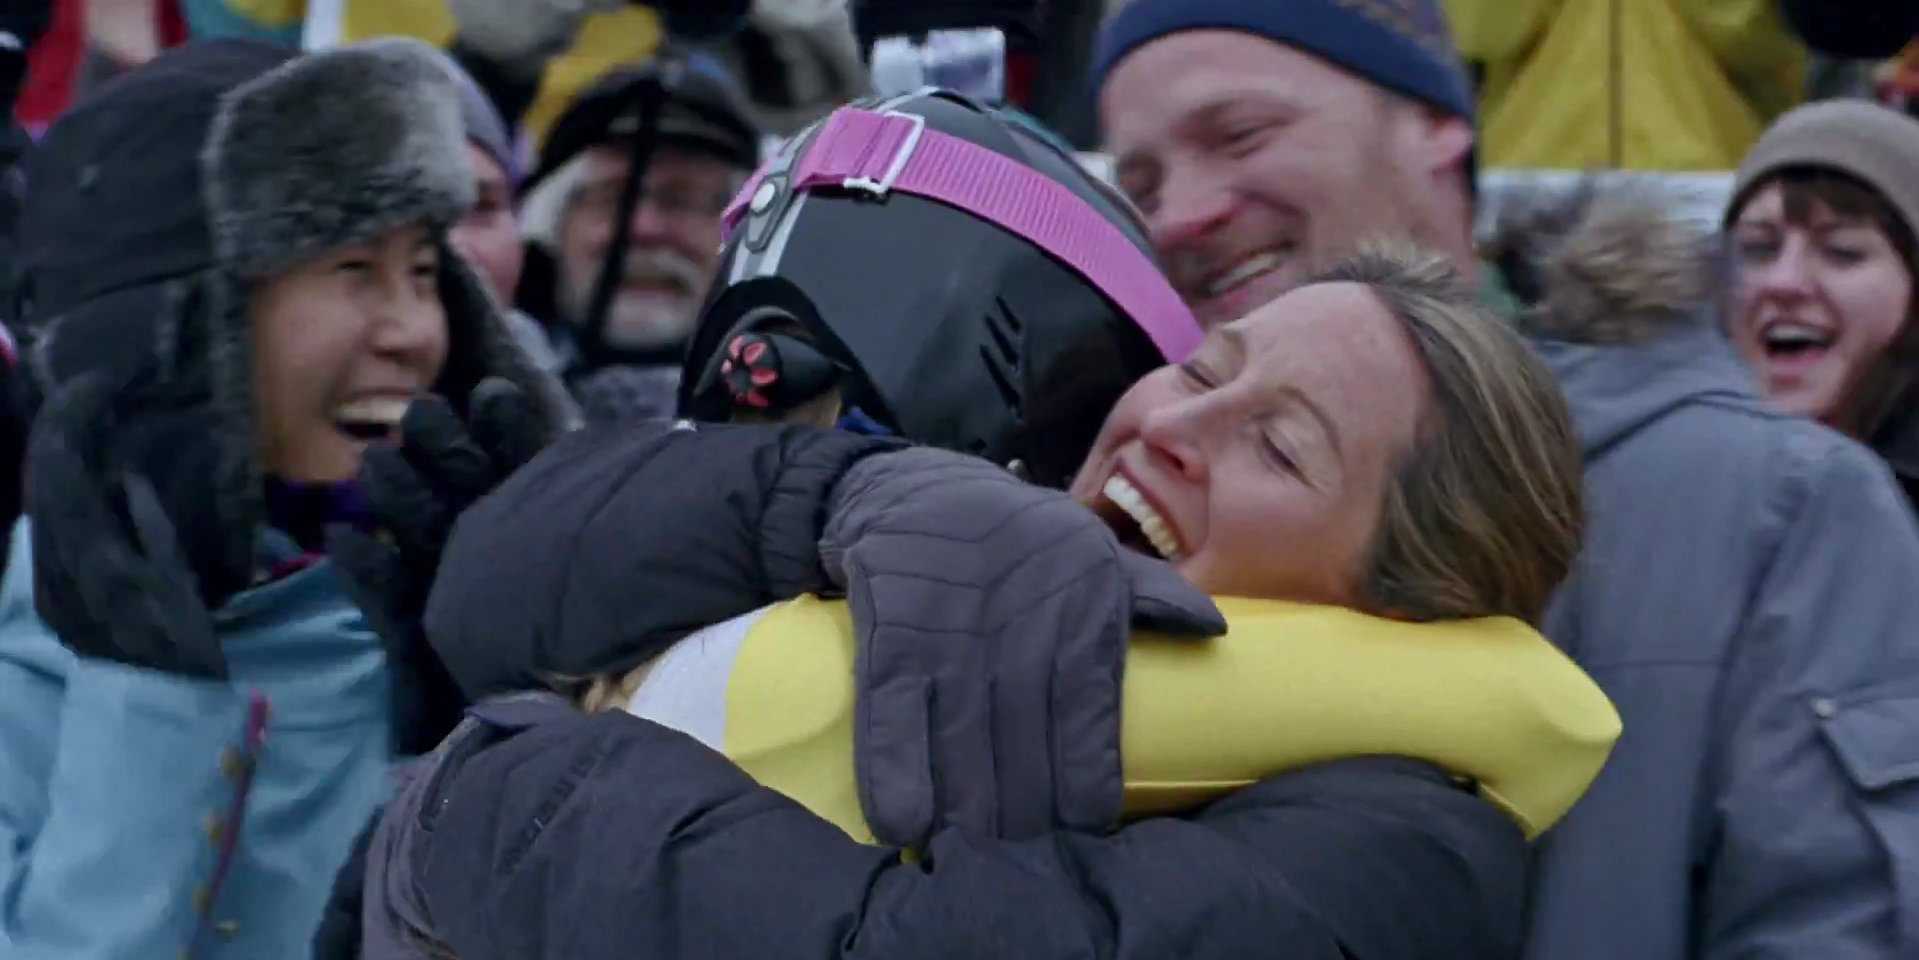 pg-made-an-awesome-sequel-to-its-tearjerker-thank-you-mom-ad-from-the-2012-olympics